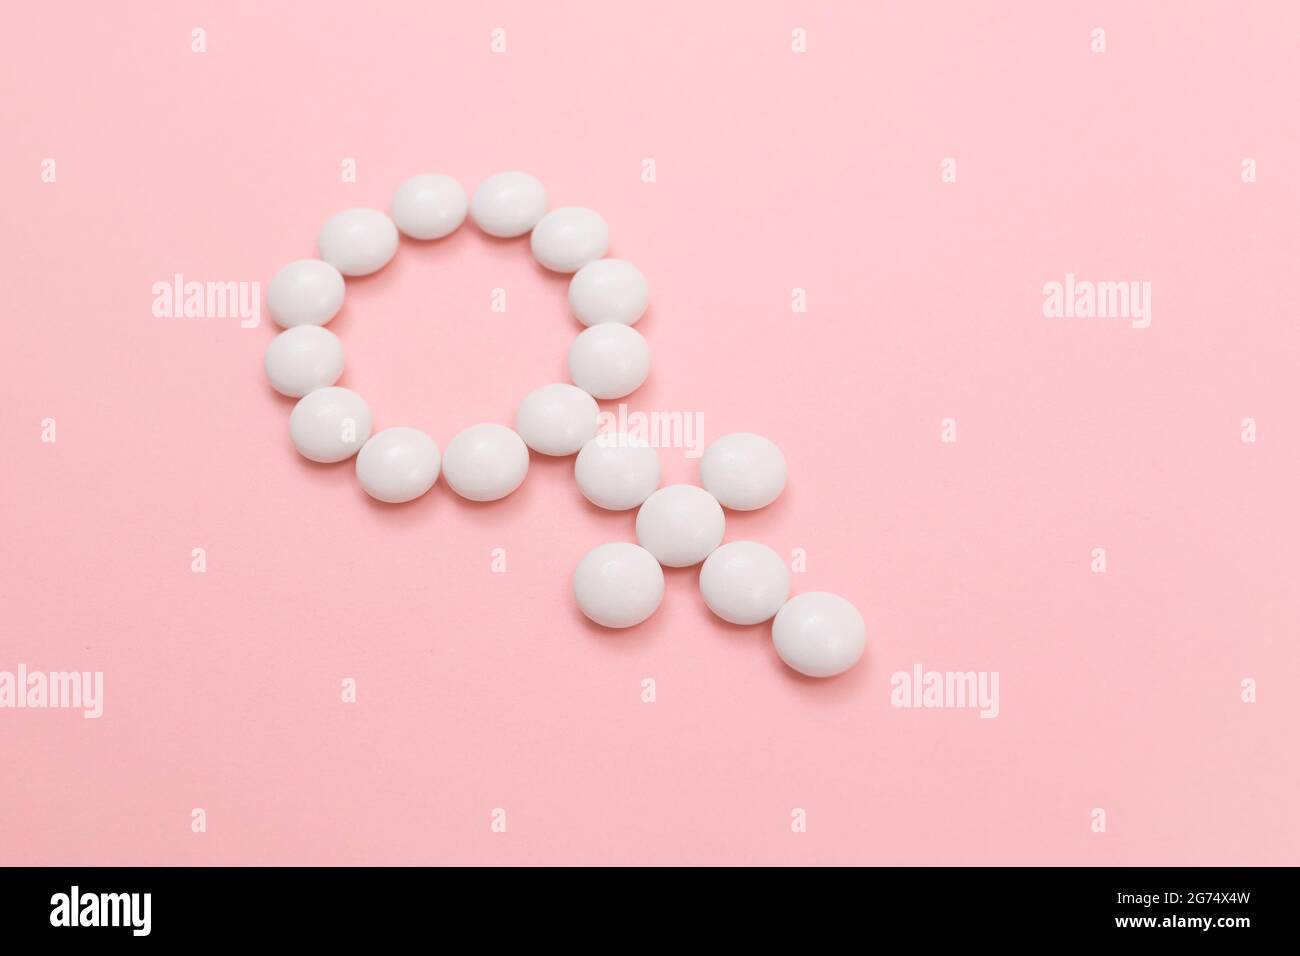 Female Gender Symbol Made from White Pills - Women's Health and Medicine, Medicaments for Women, Lying on Pink Background. Copy Space Stock Photo